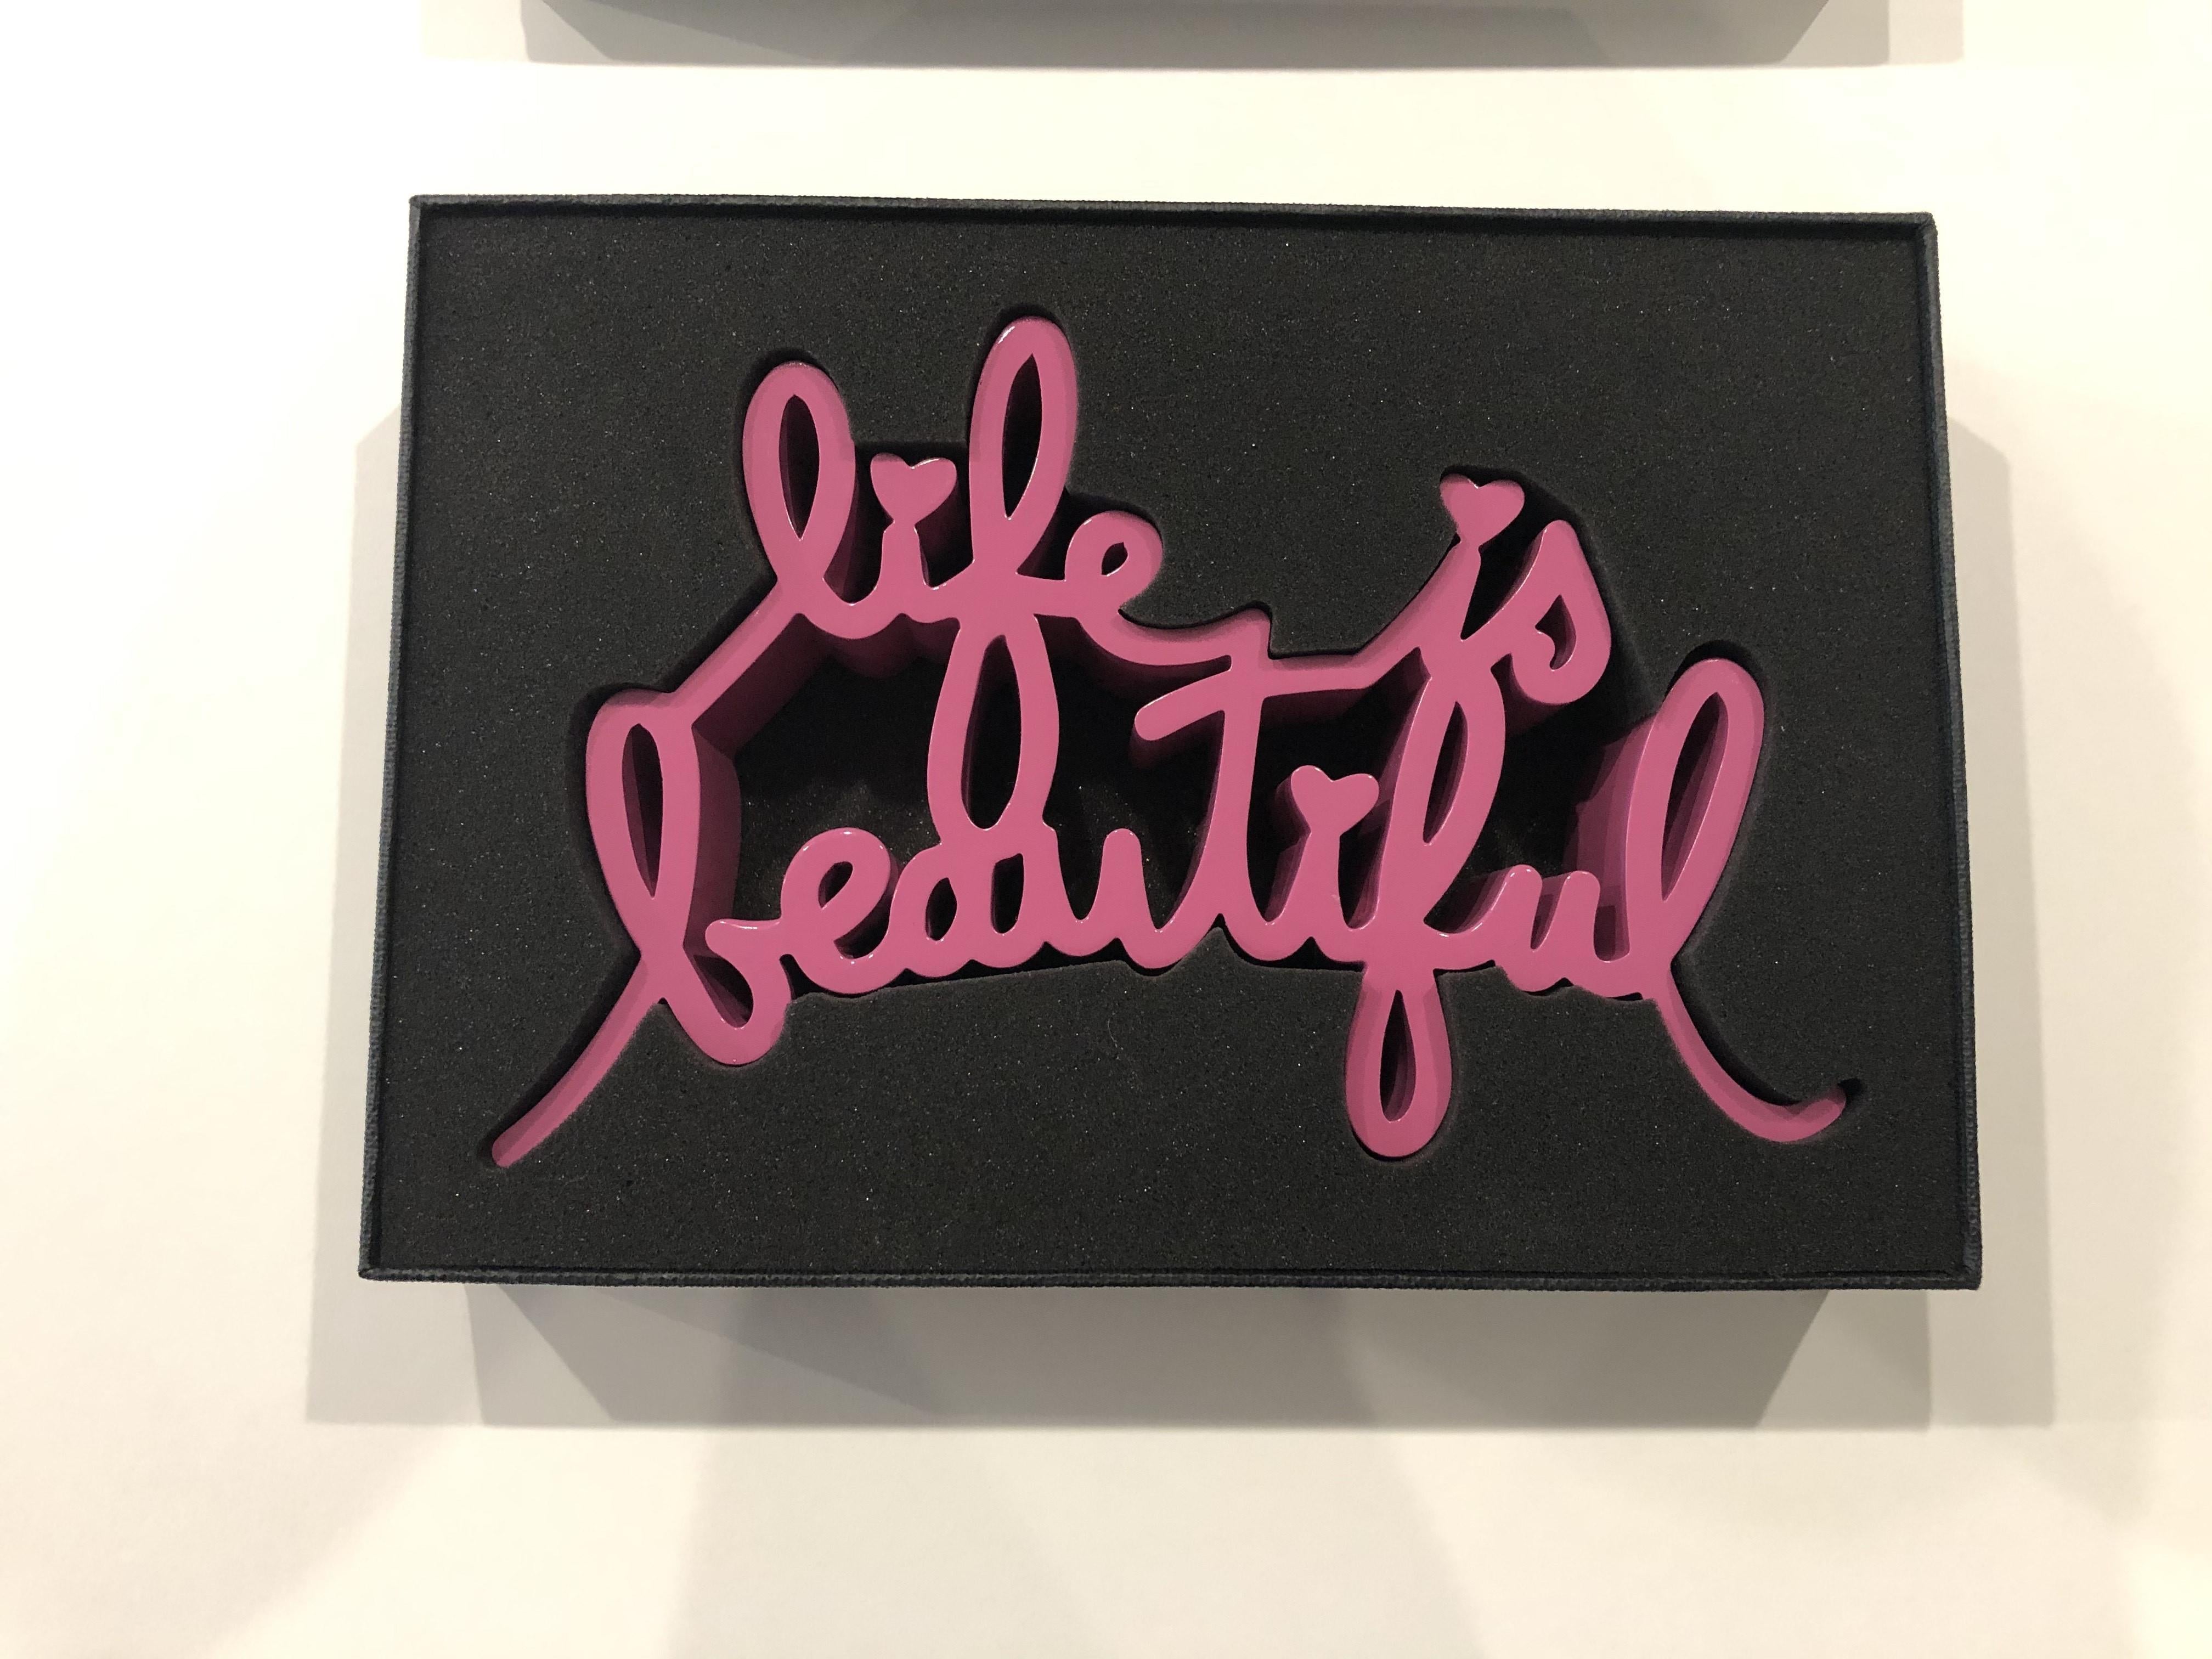 Mr. Brainwash Abstract Sculpture - Life is Beautiful (Pink)